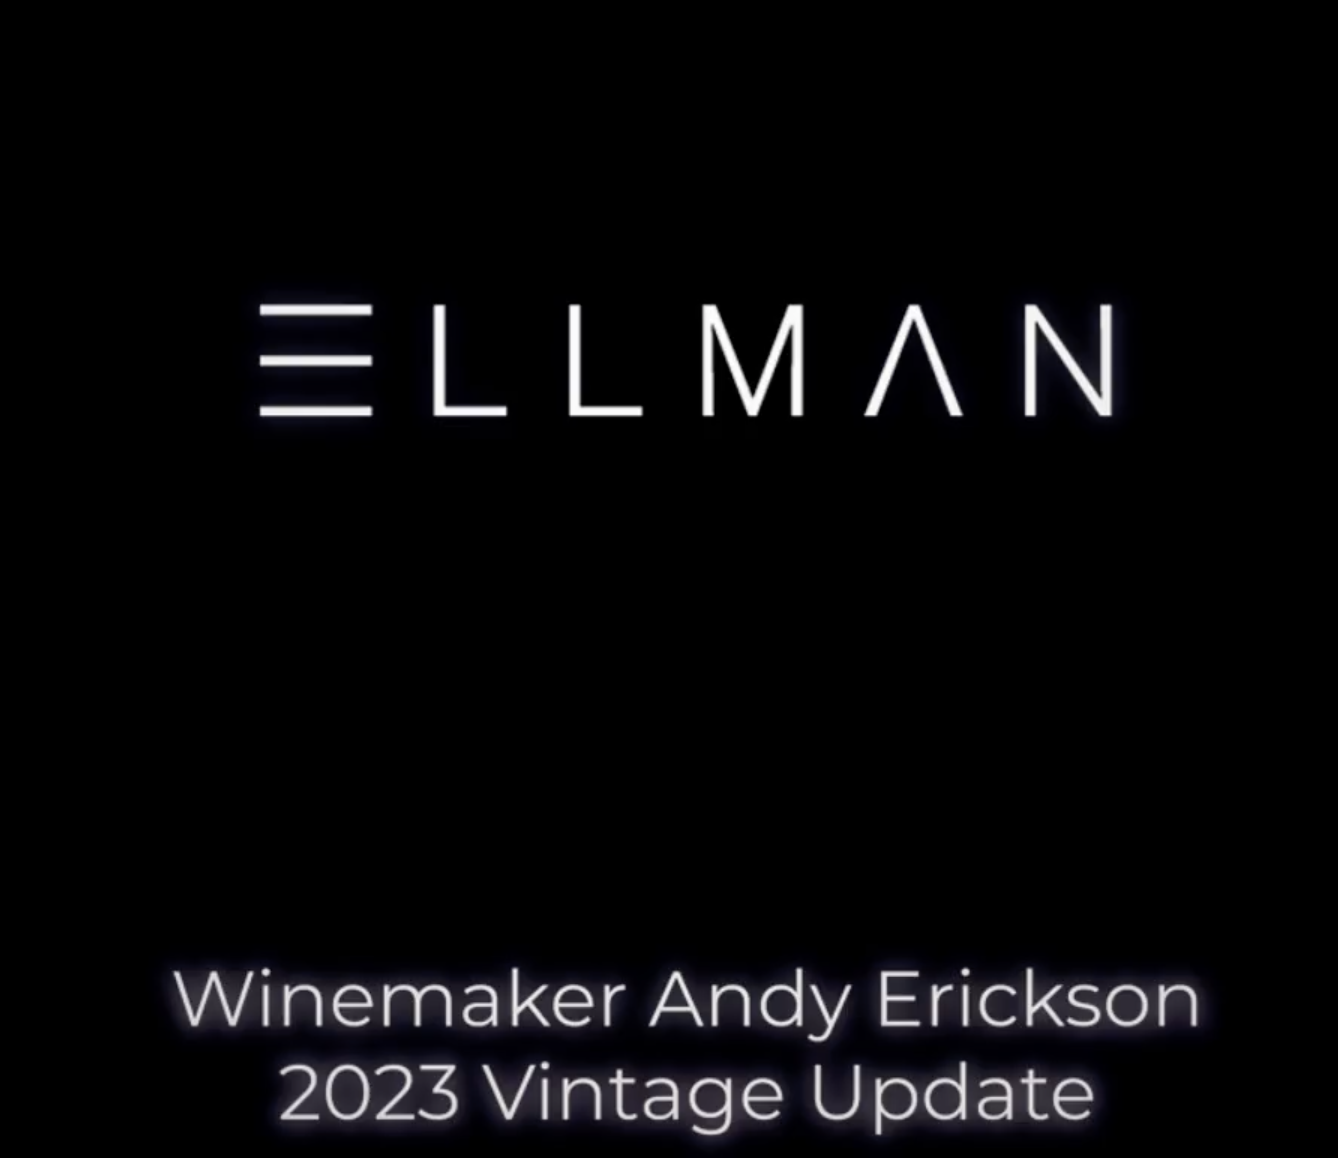 Andy Erickson, winemaker at ELLMAN, gives us an update in July 23 from Atlas Peak area. #2023vintage